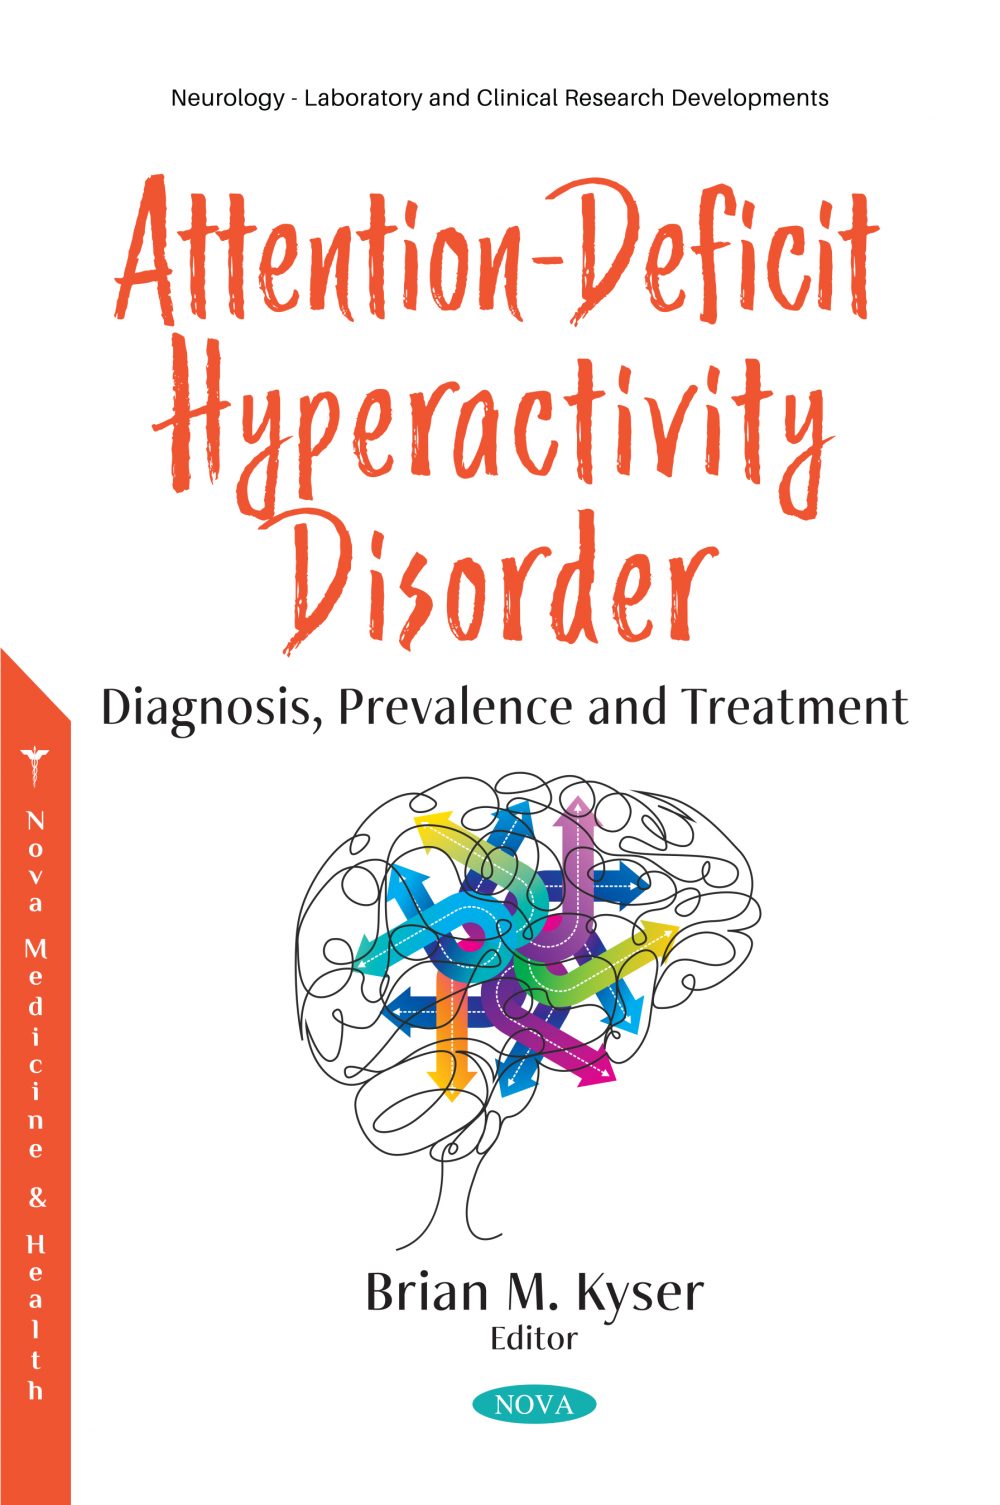 Attention-Deficit Hyperactivity Disorder Diagnosis, Prevalence and Treatment by Brian M. Kyser 